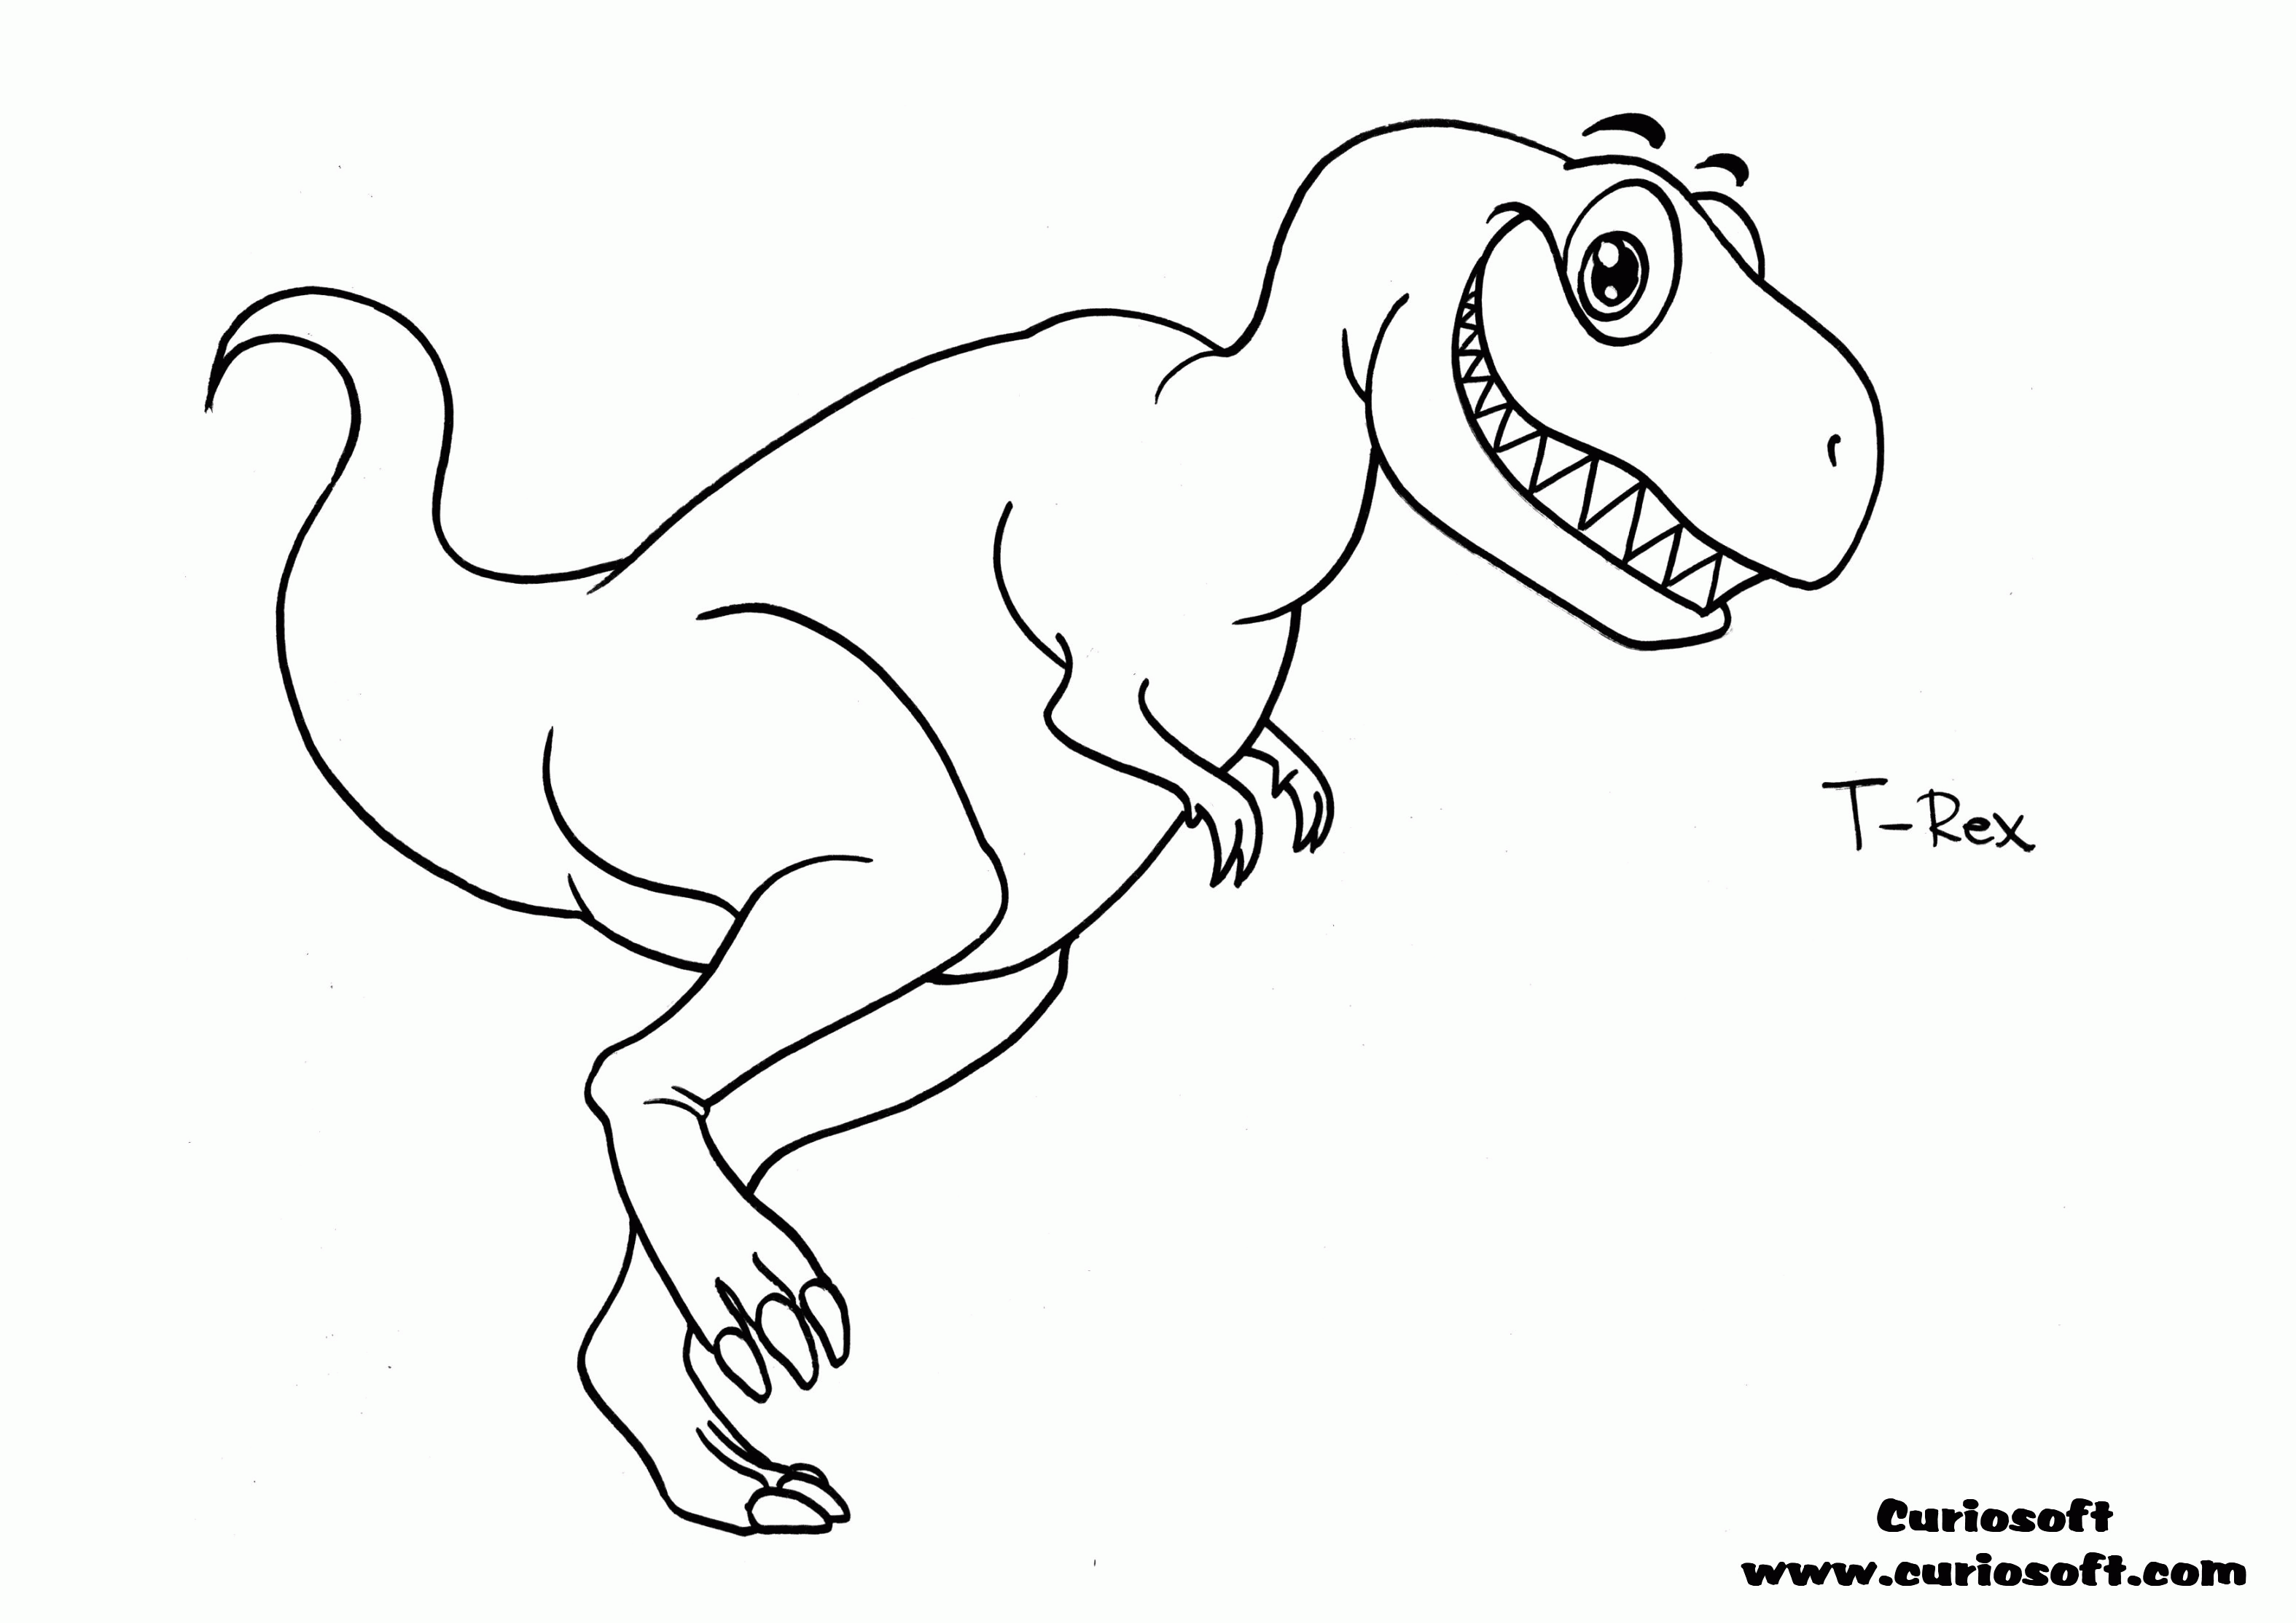 tyrannosaurus rex coloring page - High Quality Coloring Pages